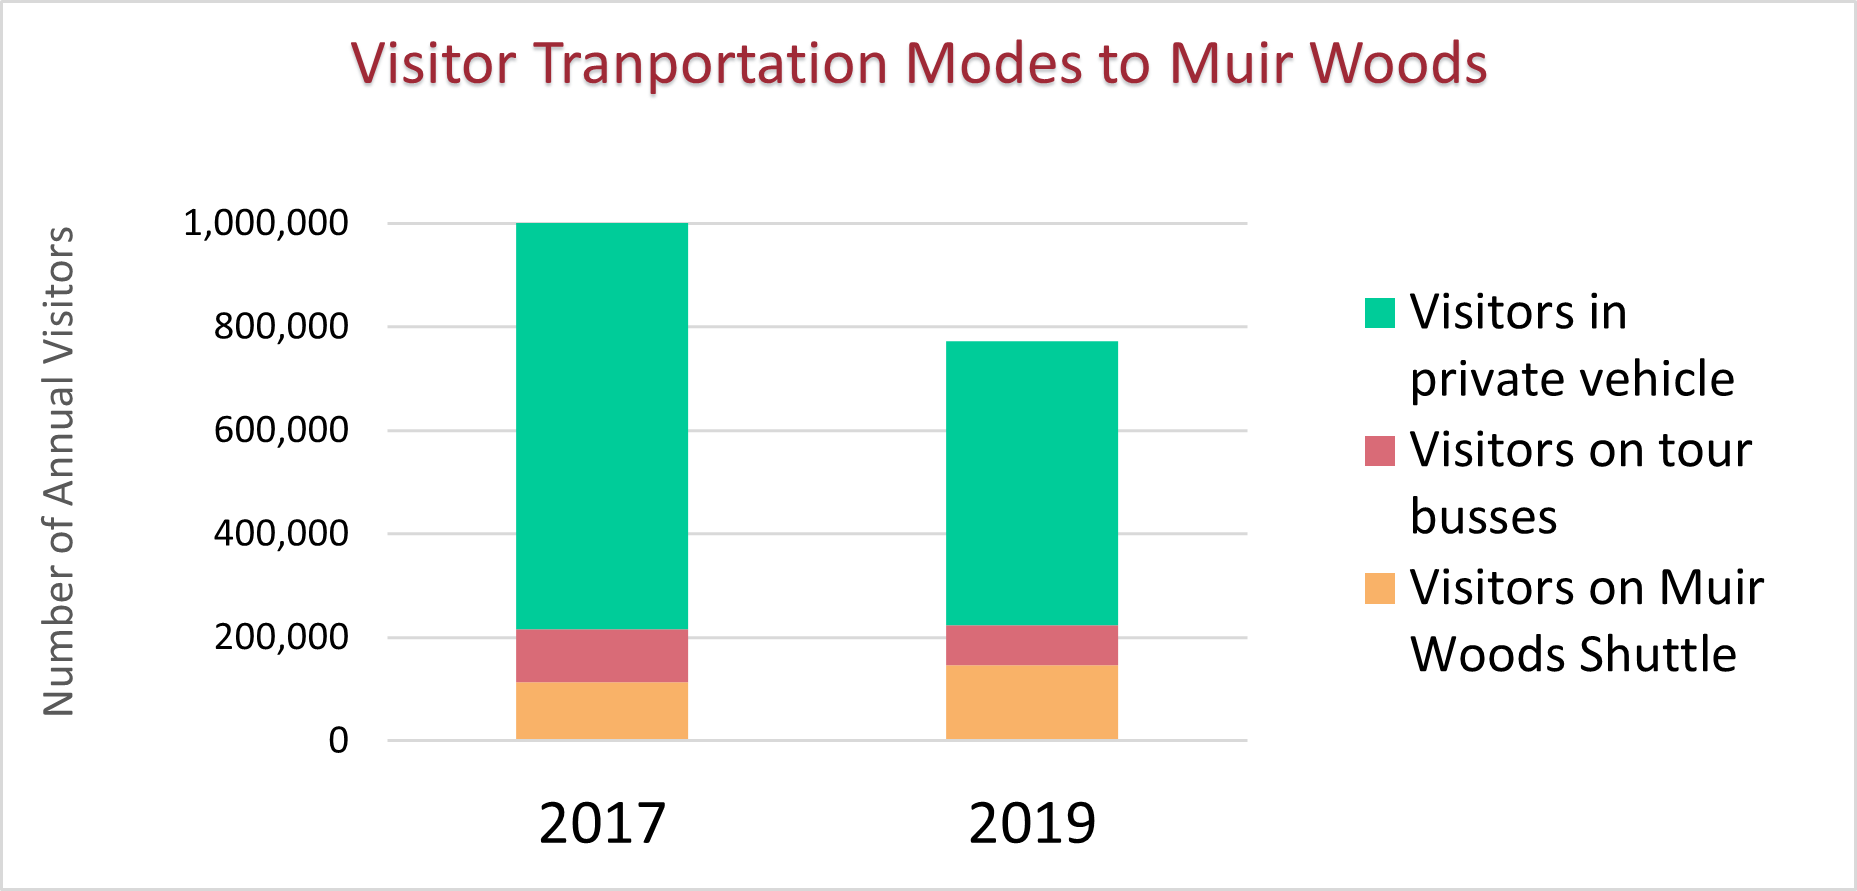 Visitor Transportation Modes to Muir Woods in 2017 and 2019